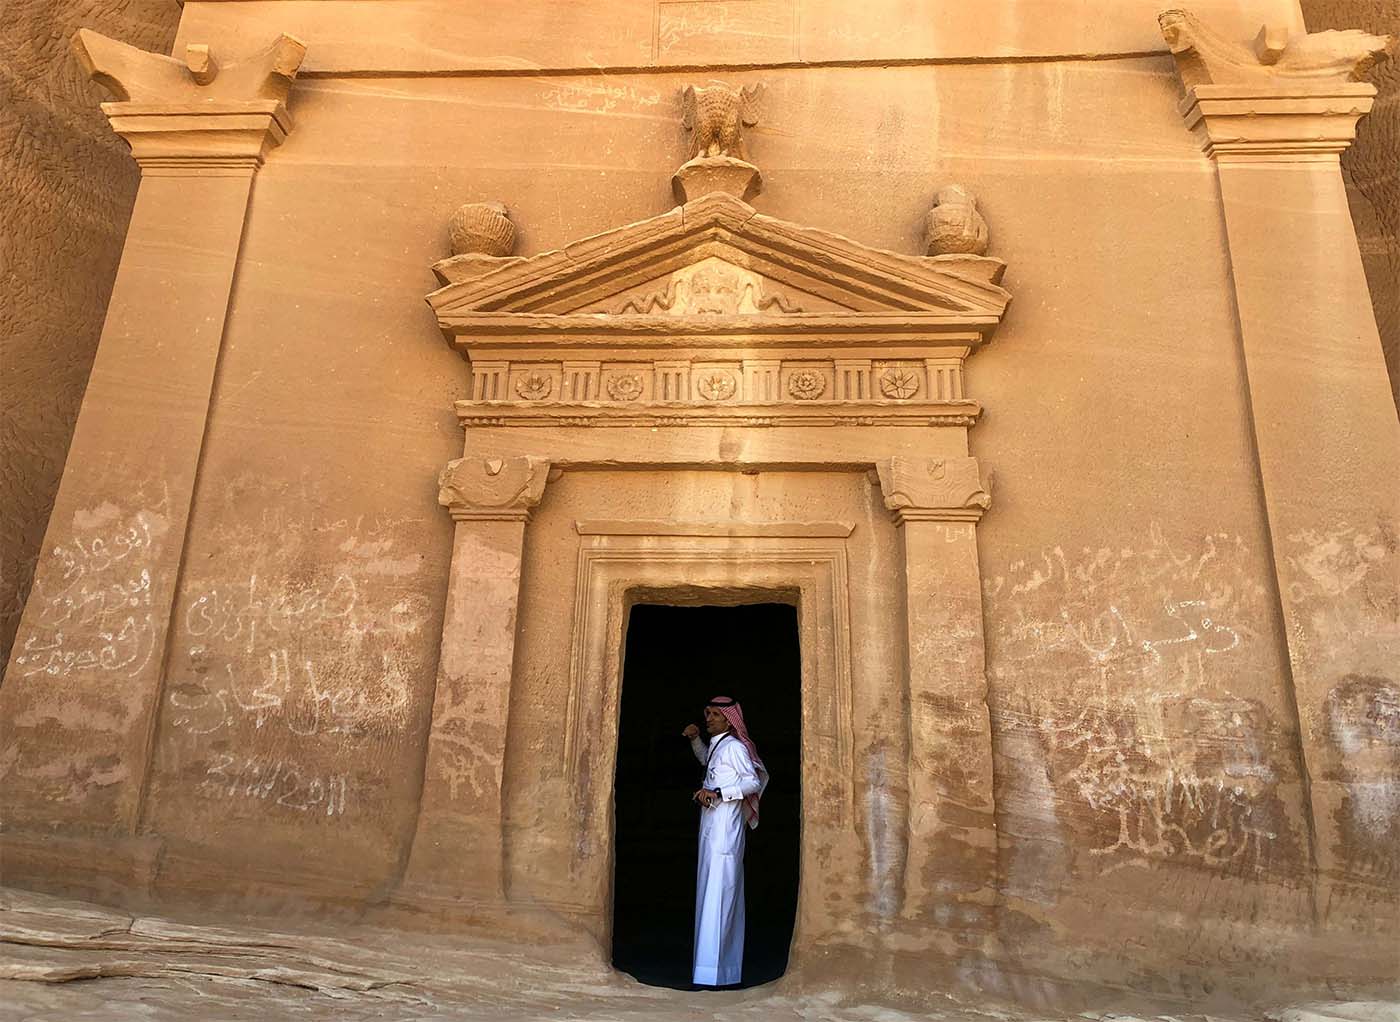 A Saudi tour guide stands inside a tomb at Mada'in Saleh antiquities site